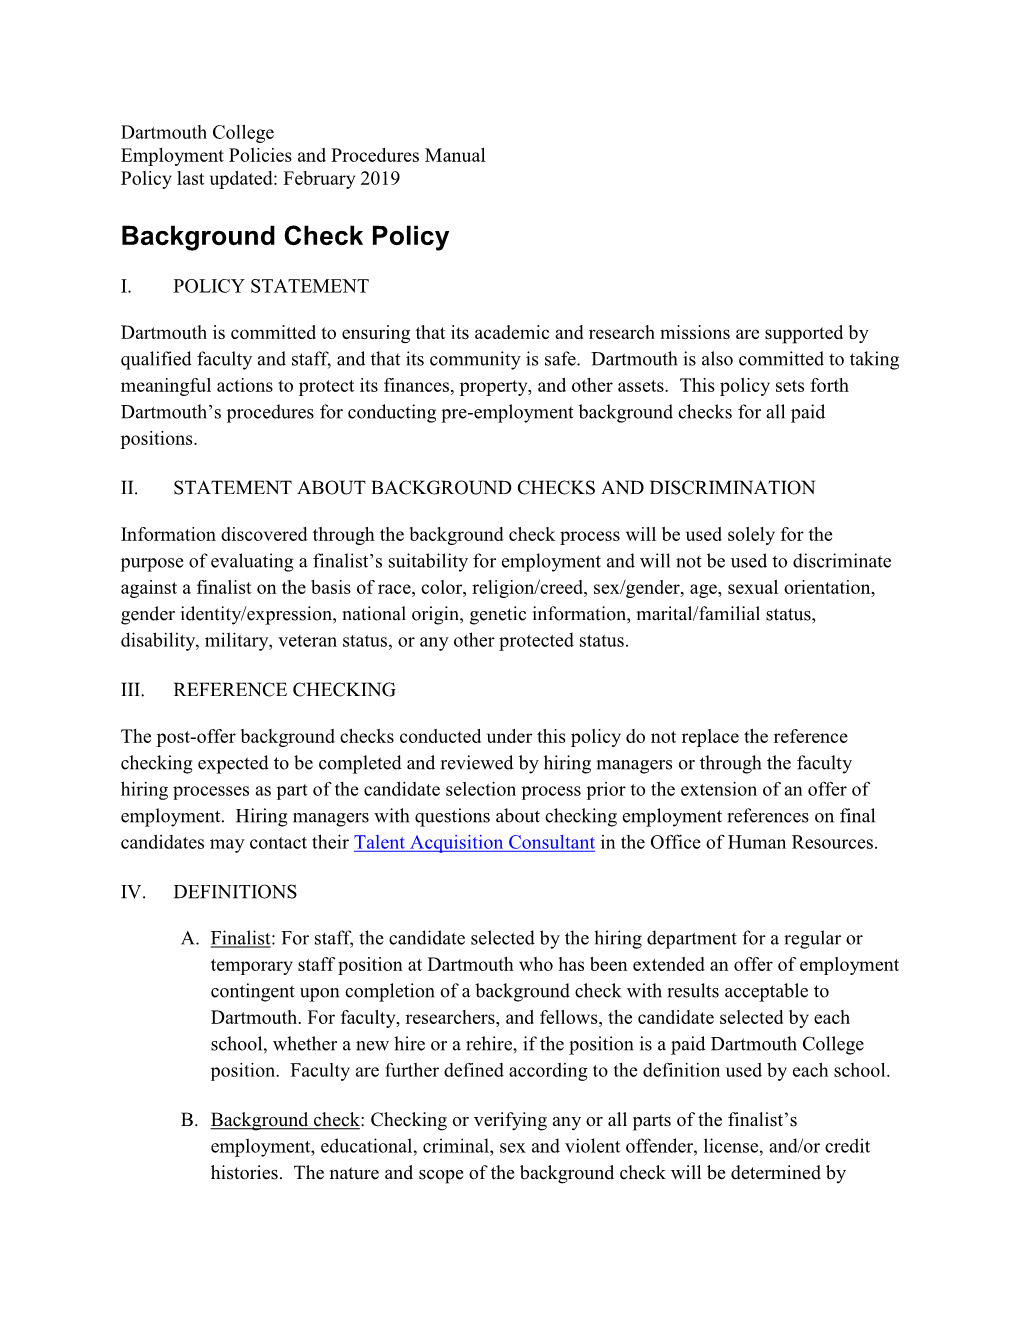 Background Check Policy